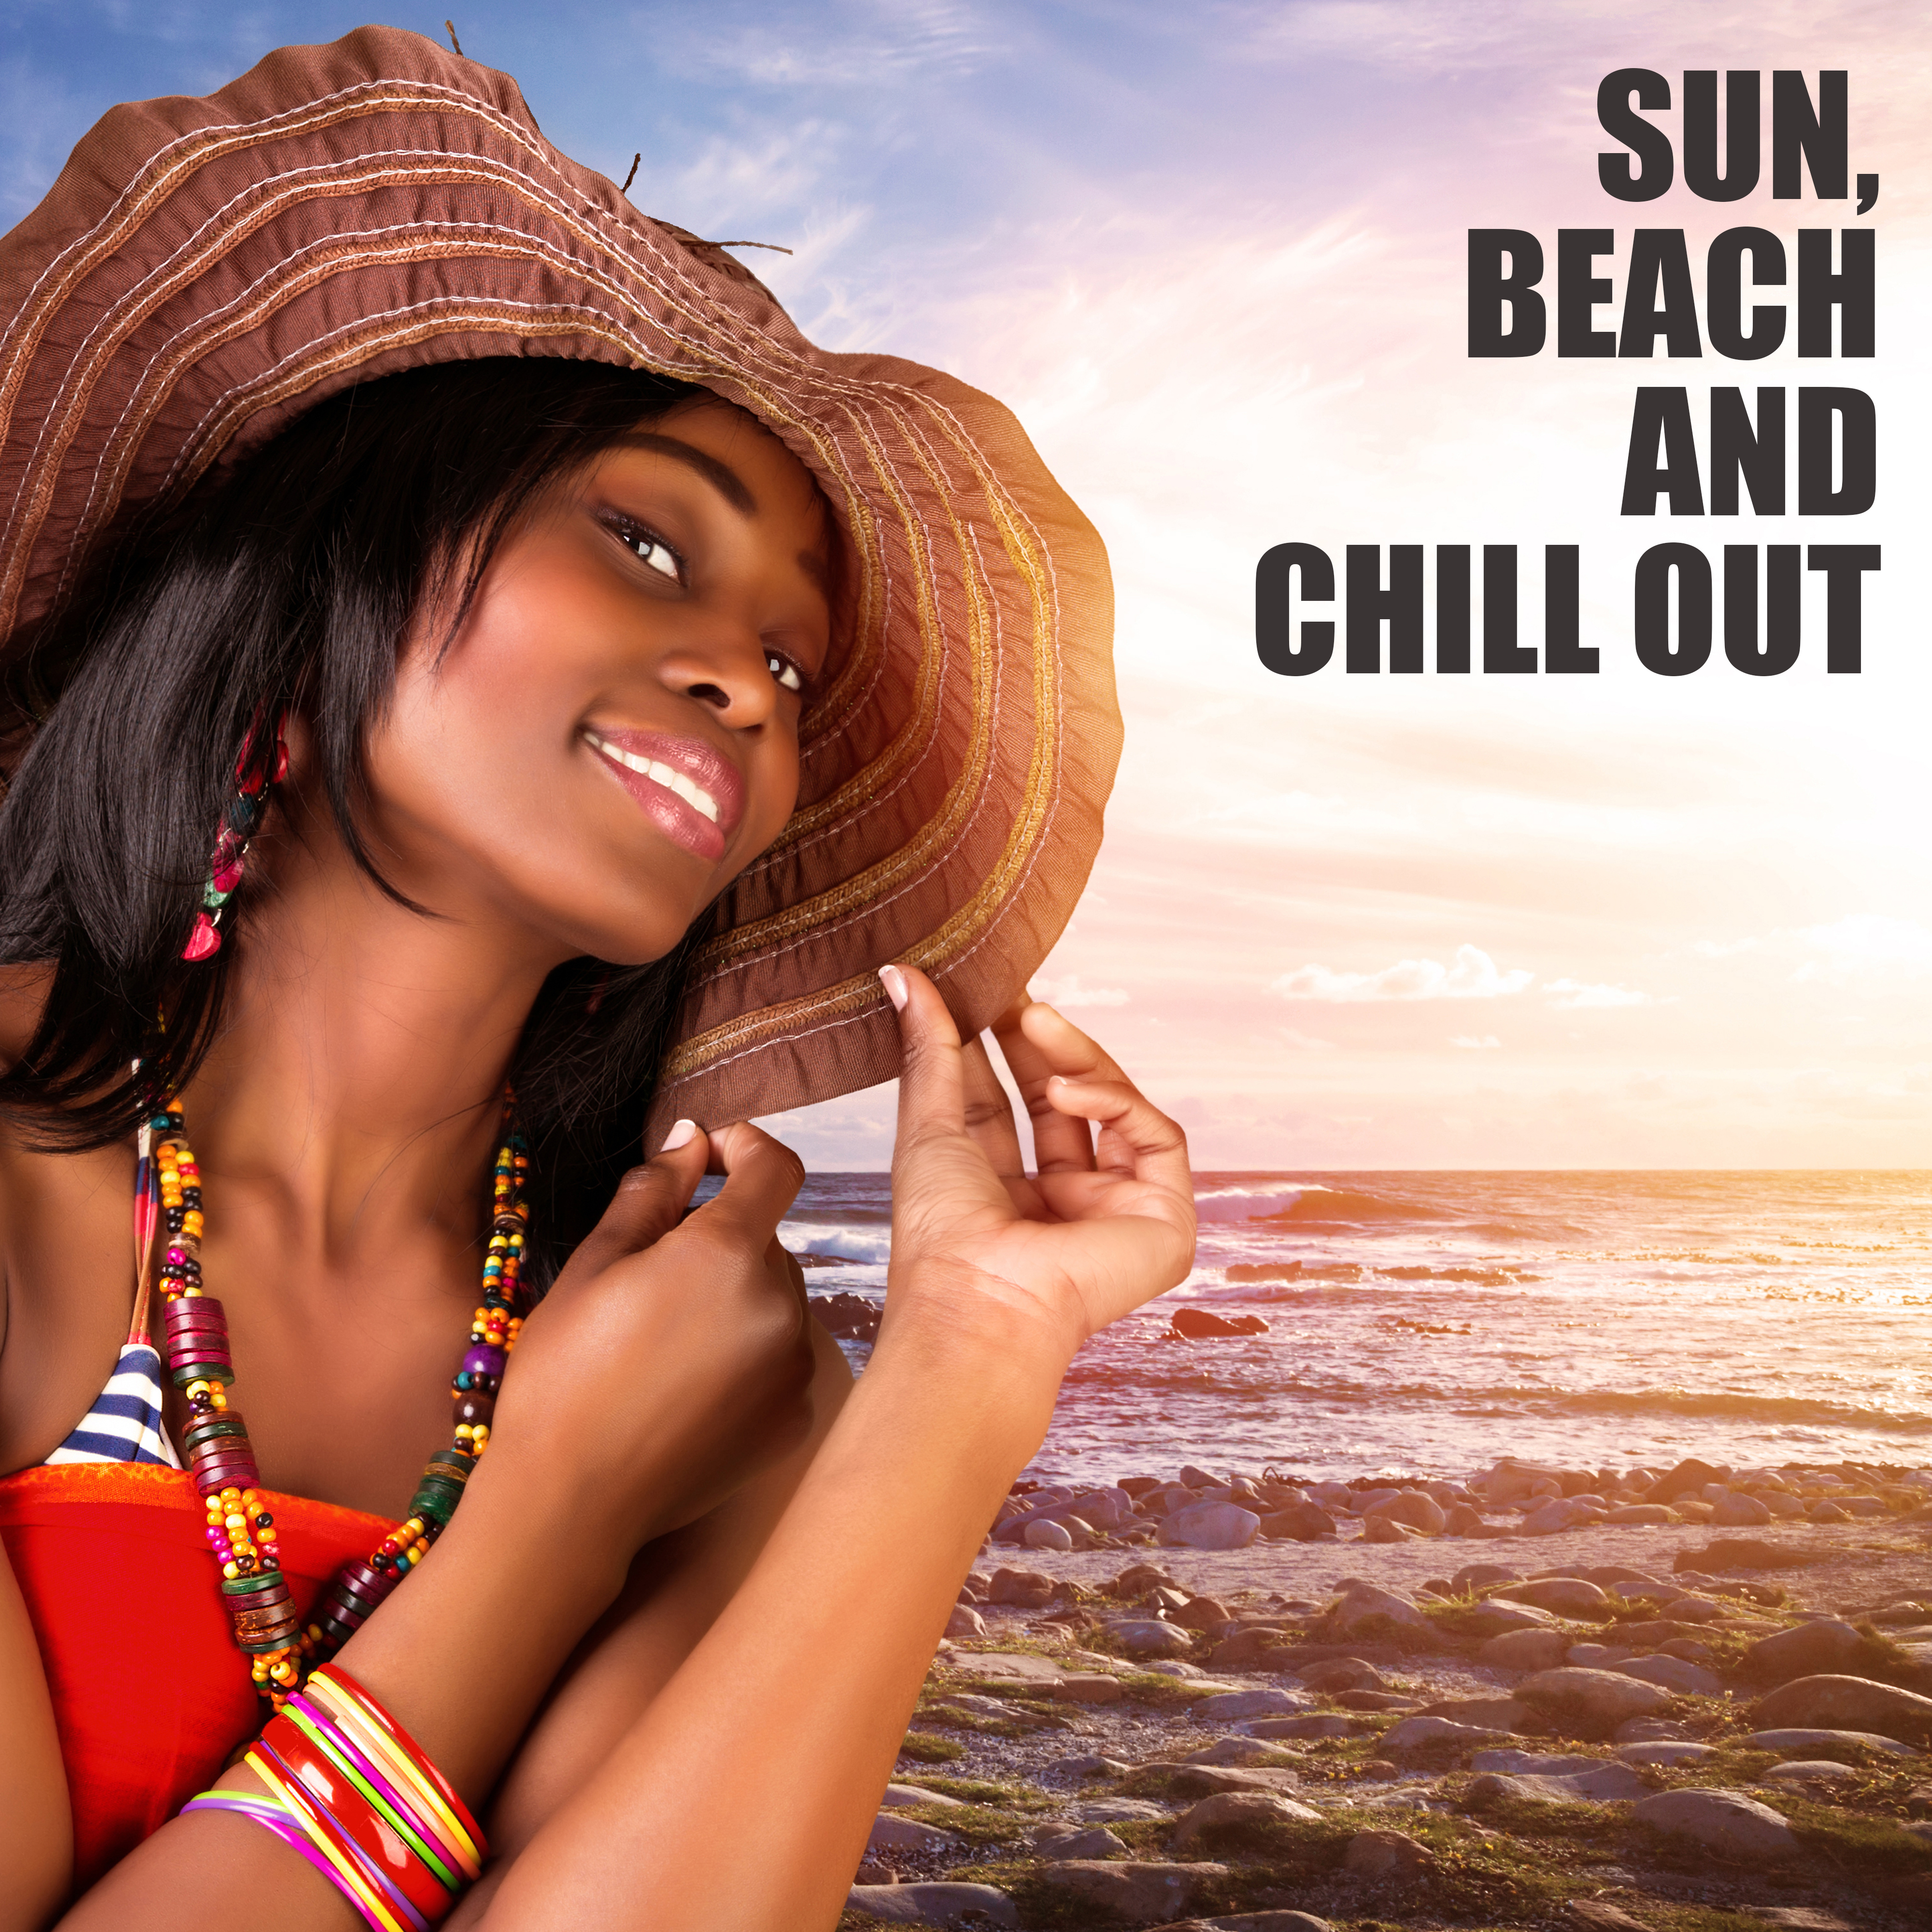 Sun, Beach and Chill Out: Warm Chillout Music for Rest, Relaxation and Chillout